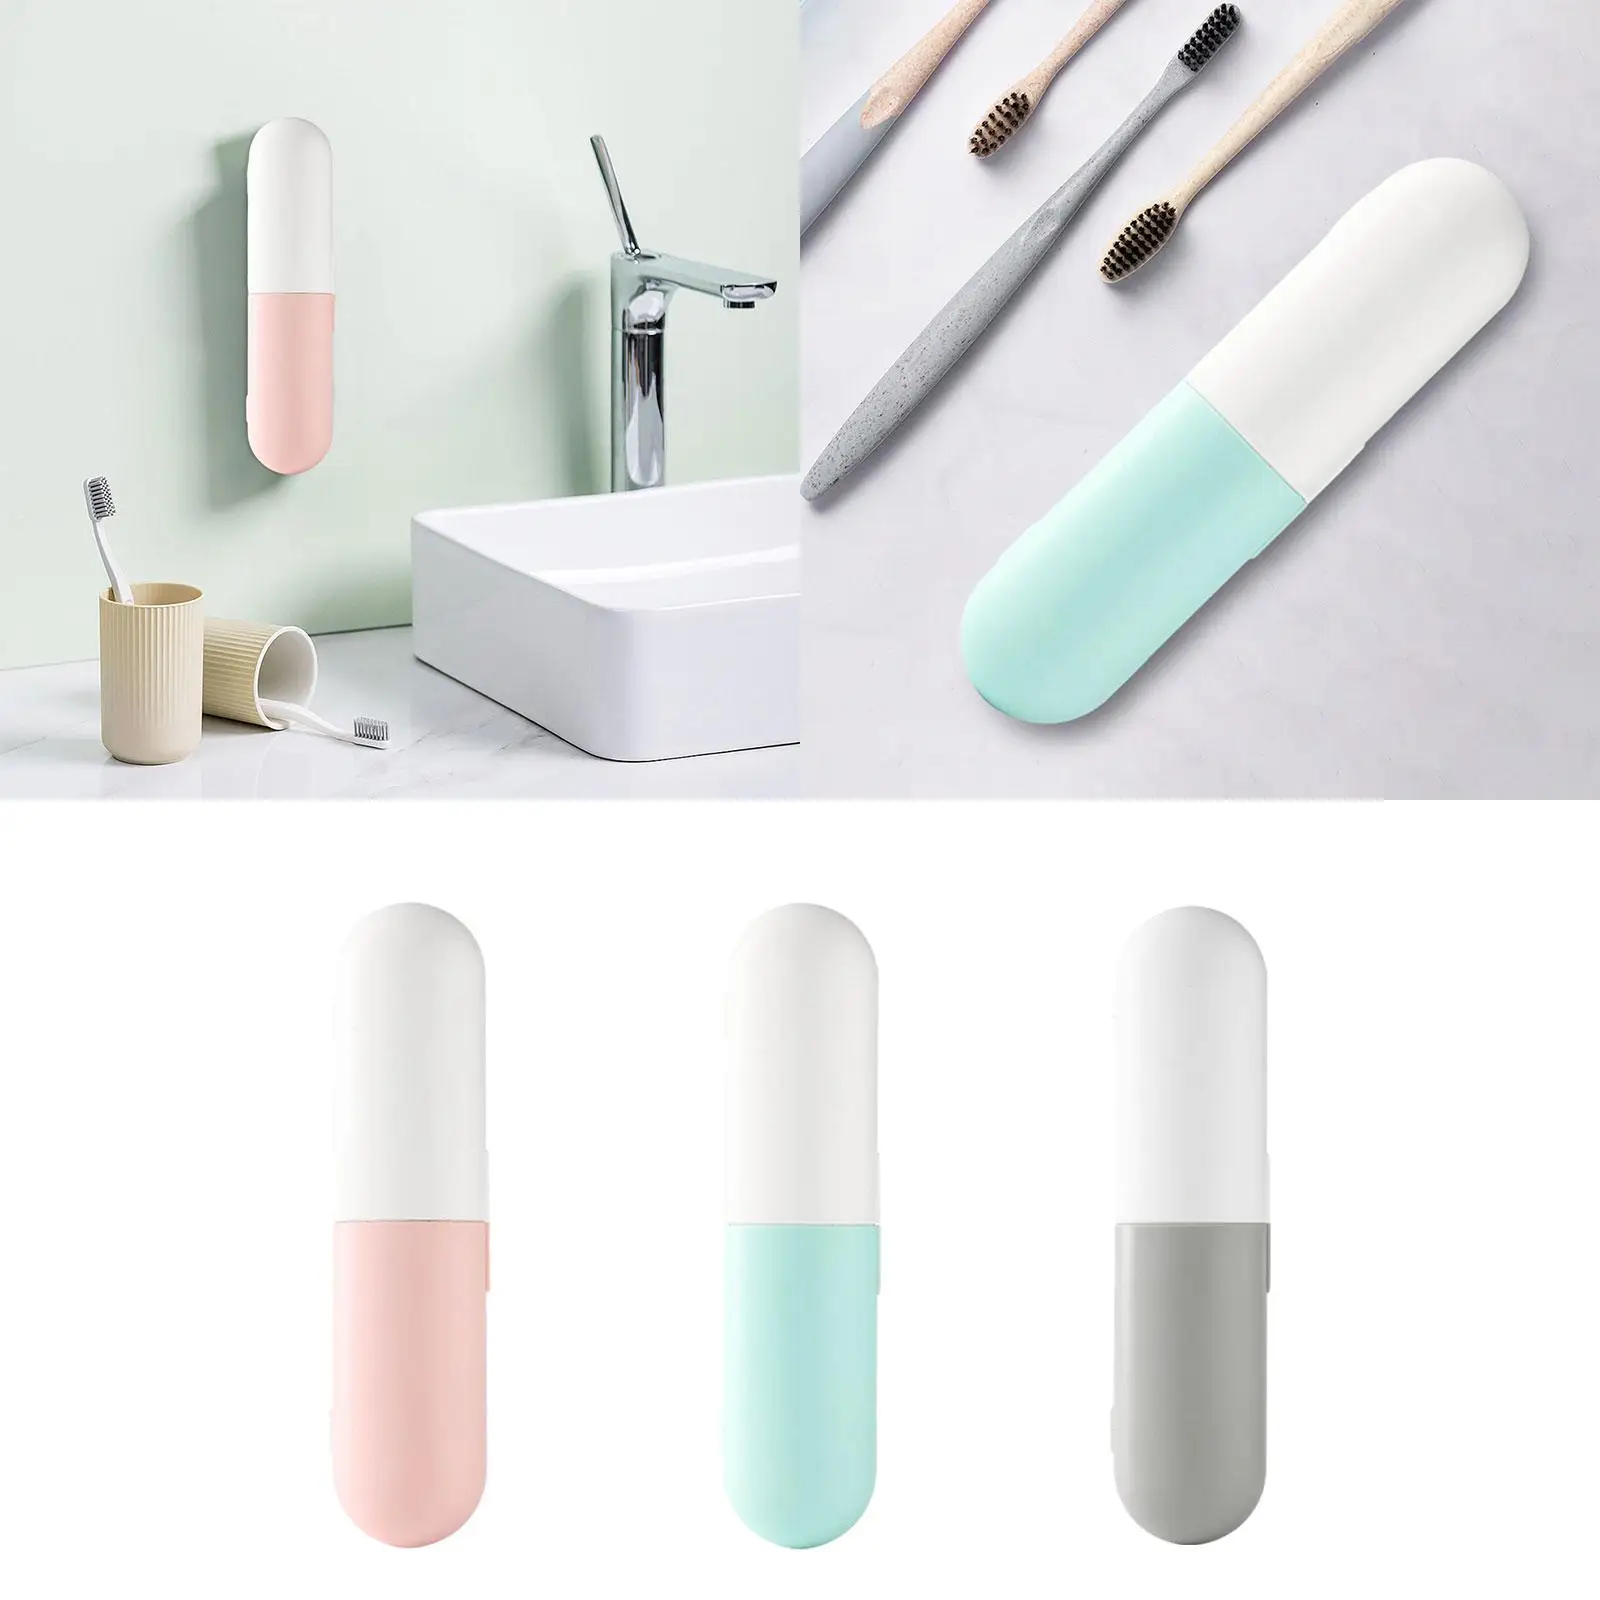 Portable Toothbrush Sanitizer Rechargeable Toothbrush Cover Travel Toothbrush Holder for Travel Hotel Business Trip Bathroom